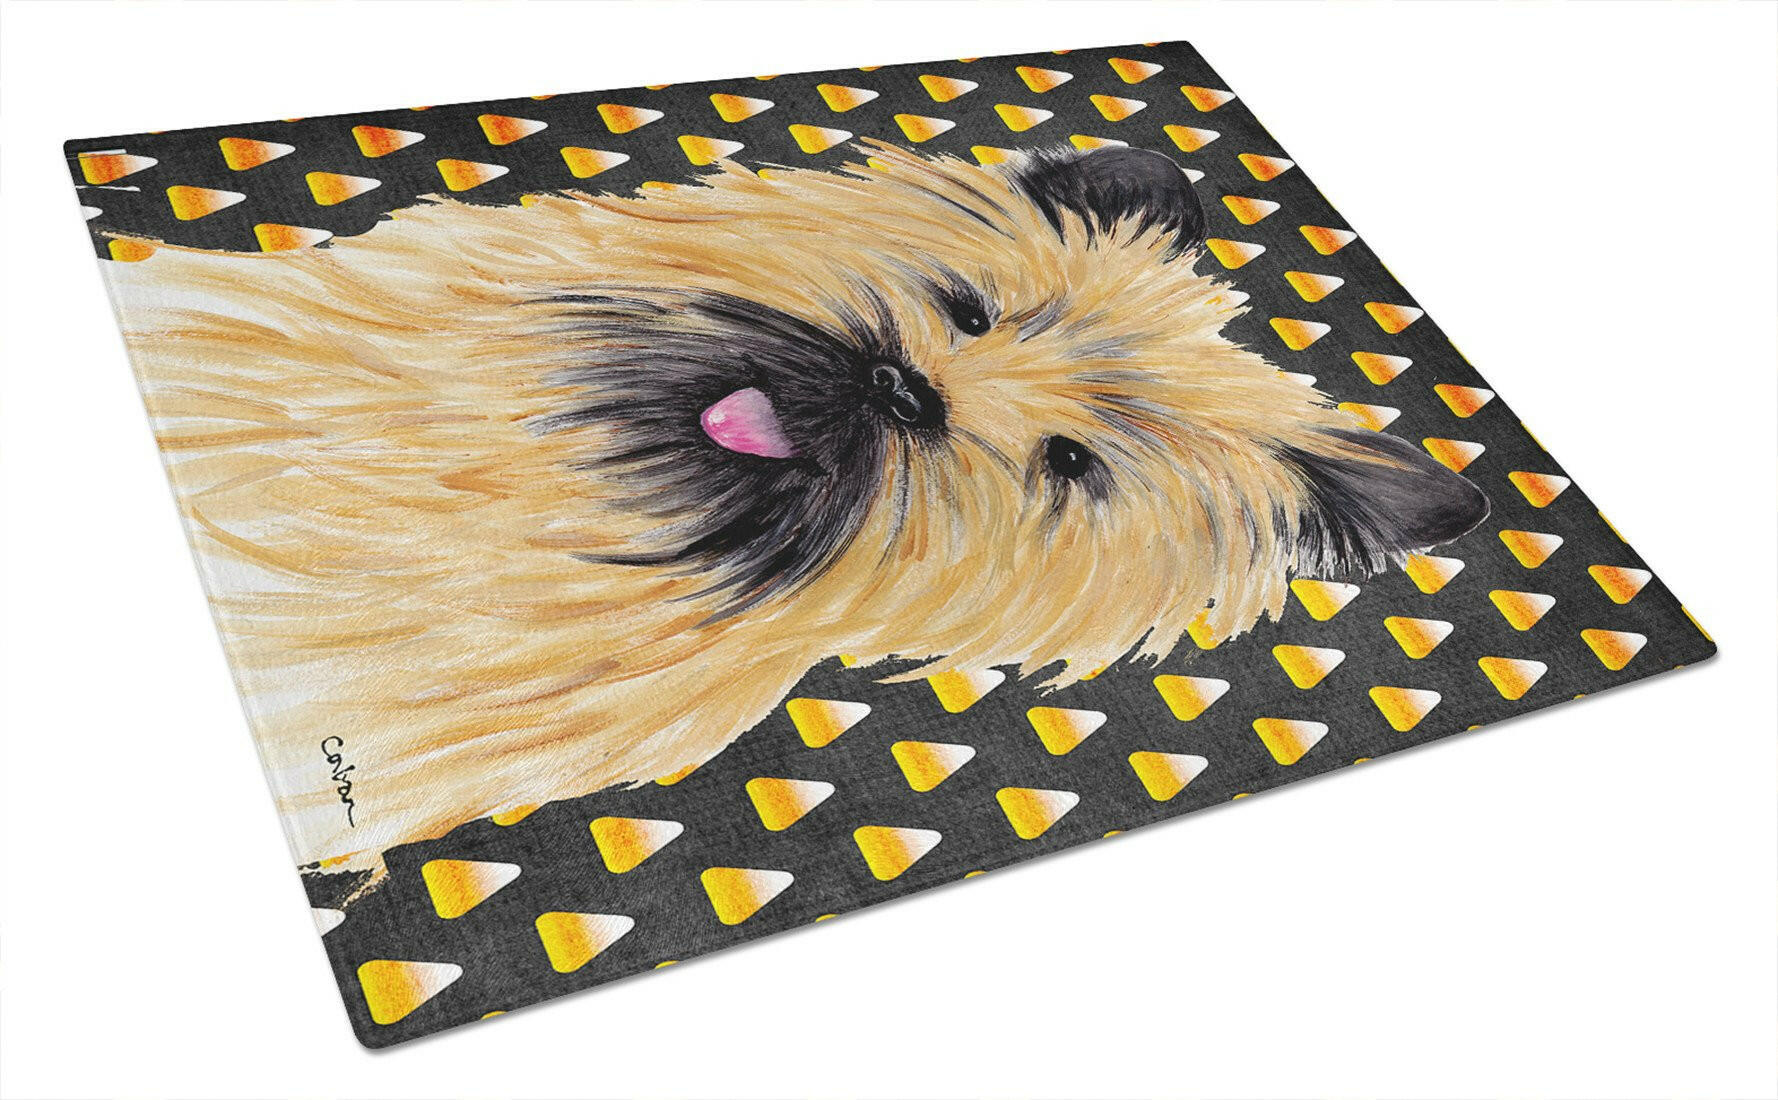 Cairn Terrier Candy Corn Halloween Portrait Glass Cutting Board Large by Caroline's Treasures